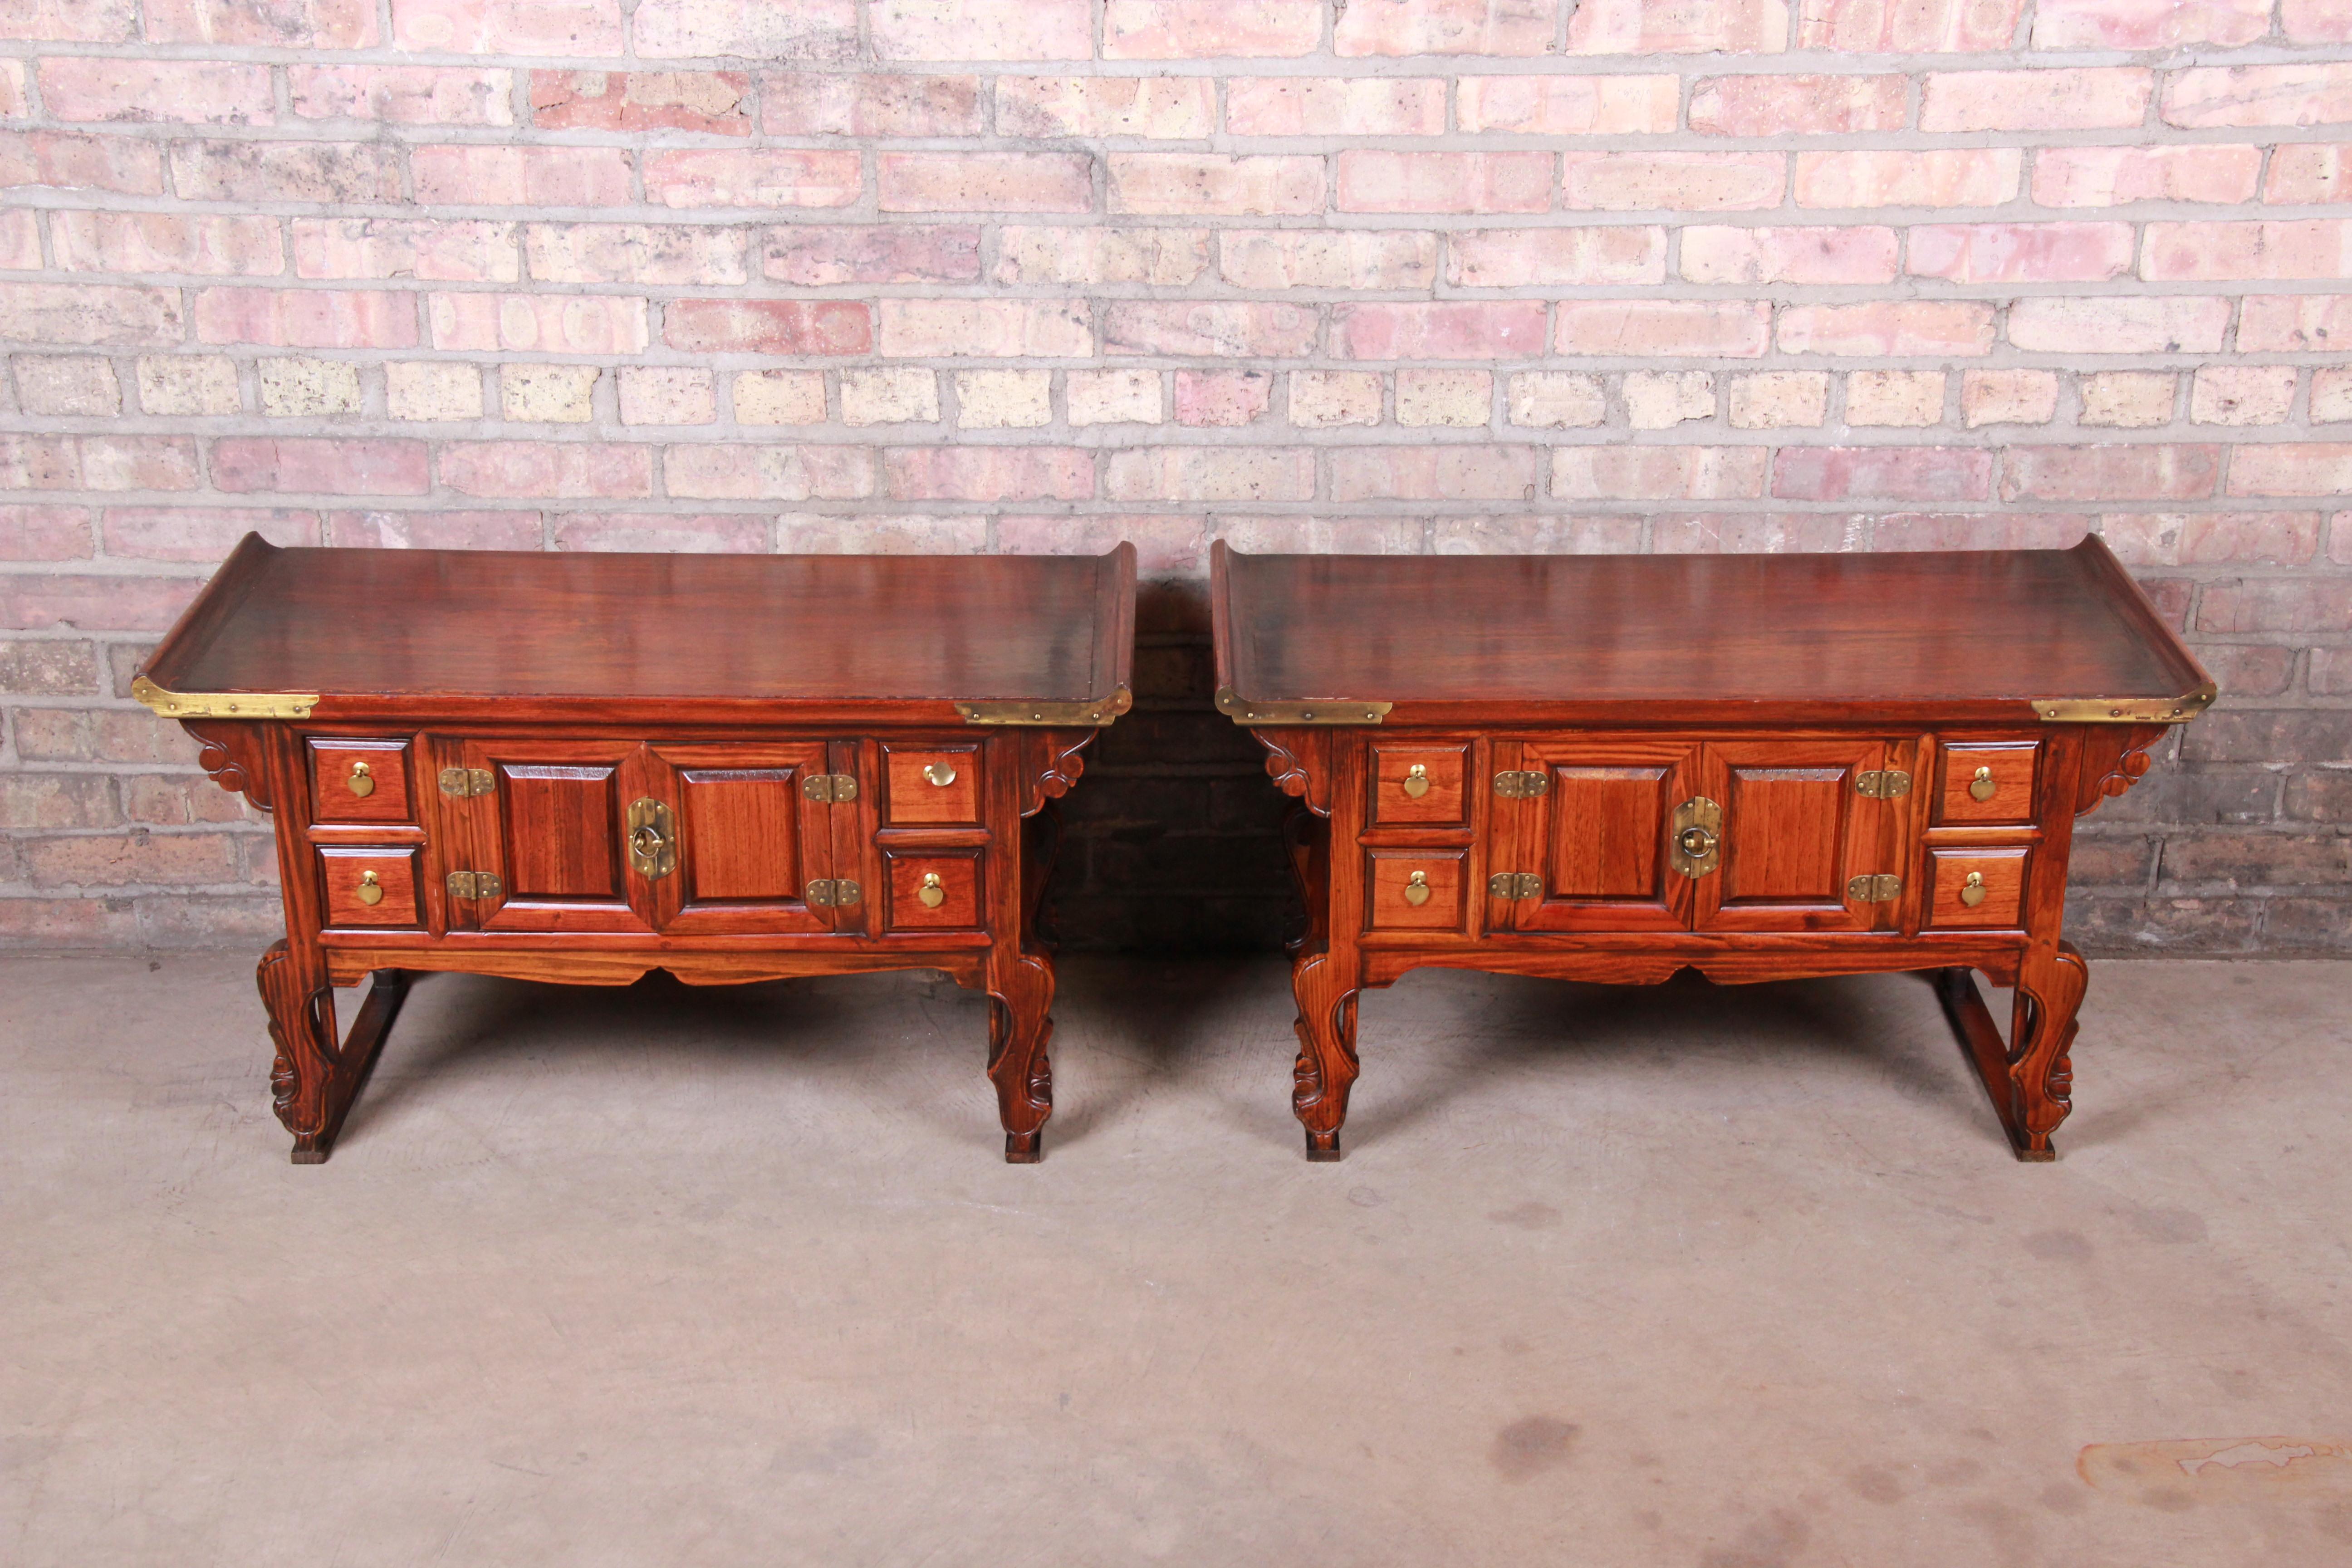 A gorgeous pair of Asian Hollywood Regency low nightstands or commodes

Korea, mid-20th century

Carved elm wood, with brass hardware and accents.

Measures: 33.25